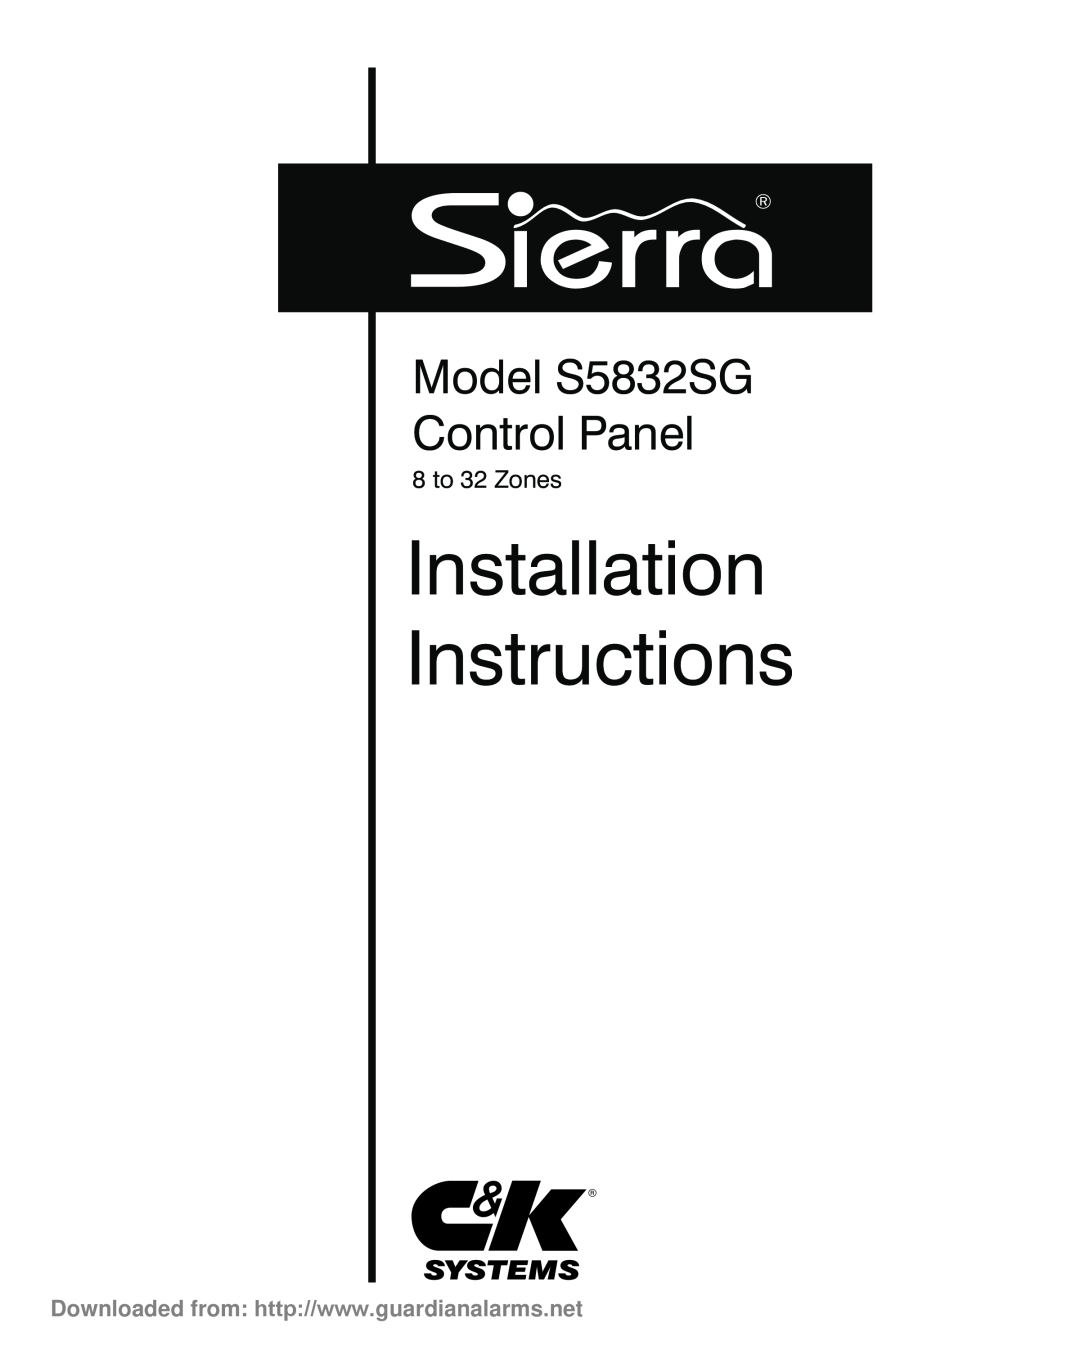 Sierra installation instructions Installation Instructions, Model S5832SG Control Panel 8 to 32 Zones 